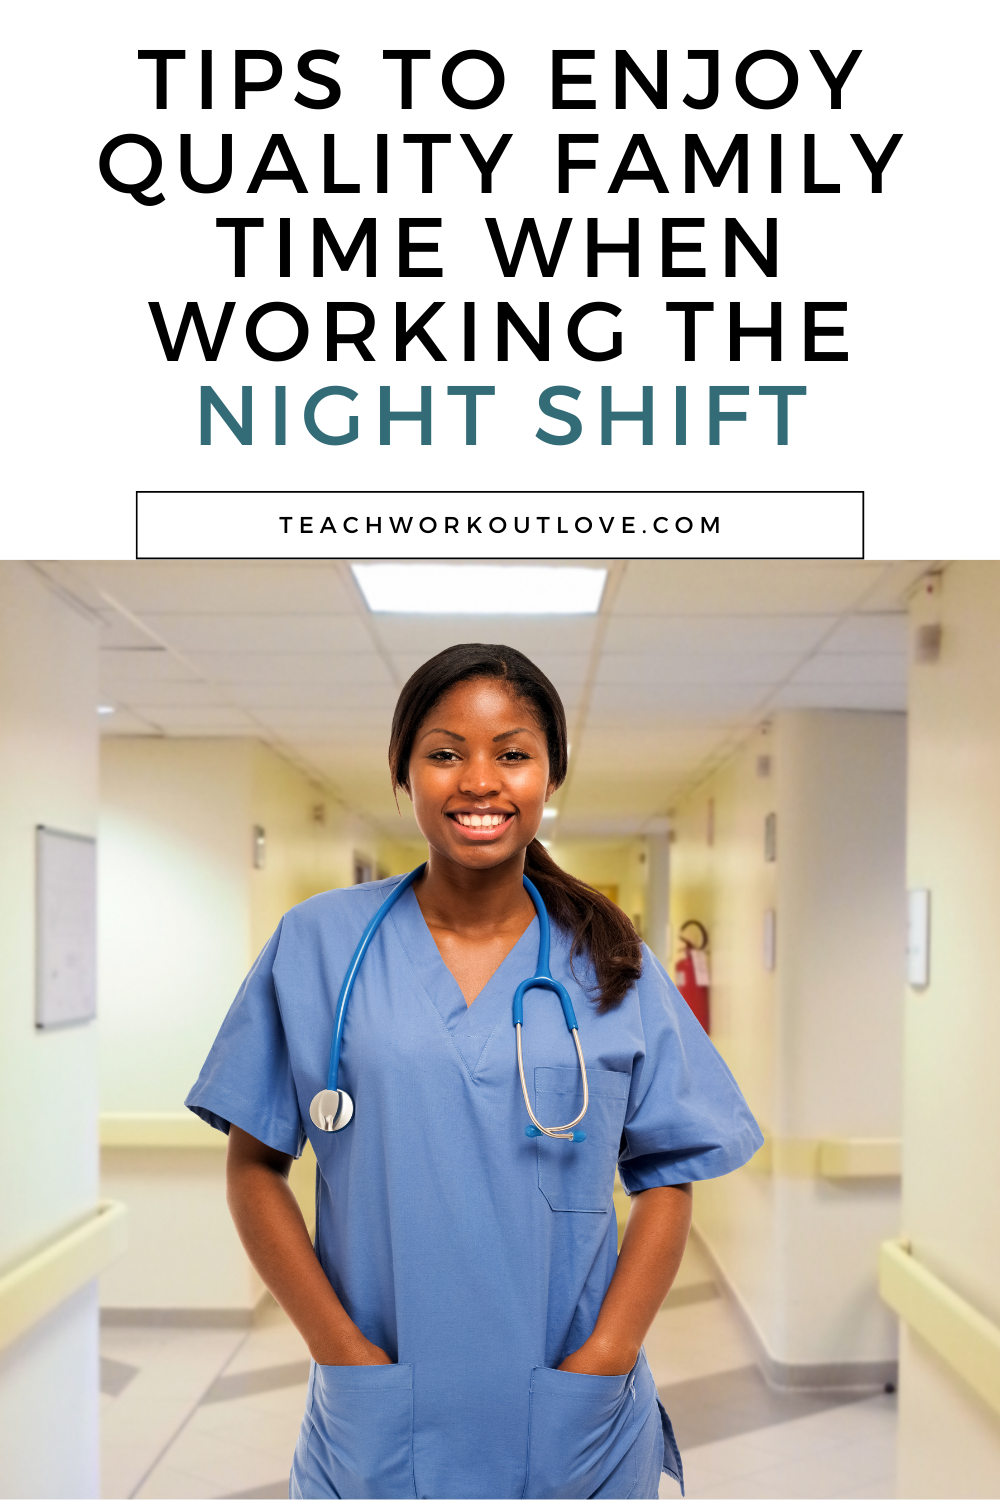 In this article, we take a look at what it takes to enjoy quality time with your family while working the night shift.